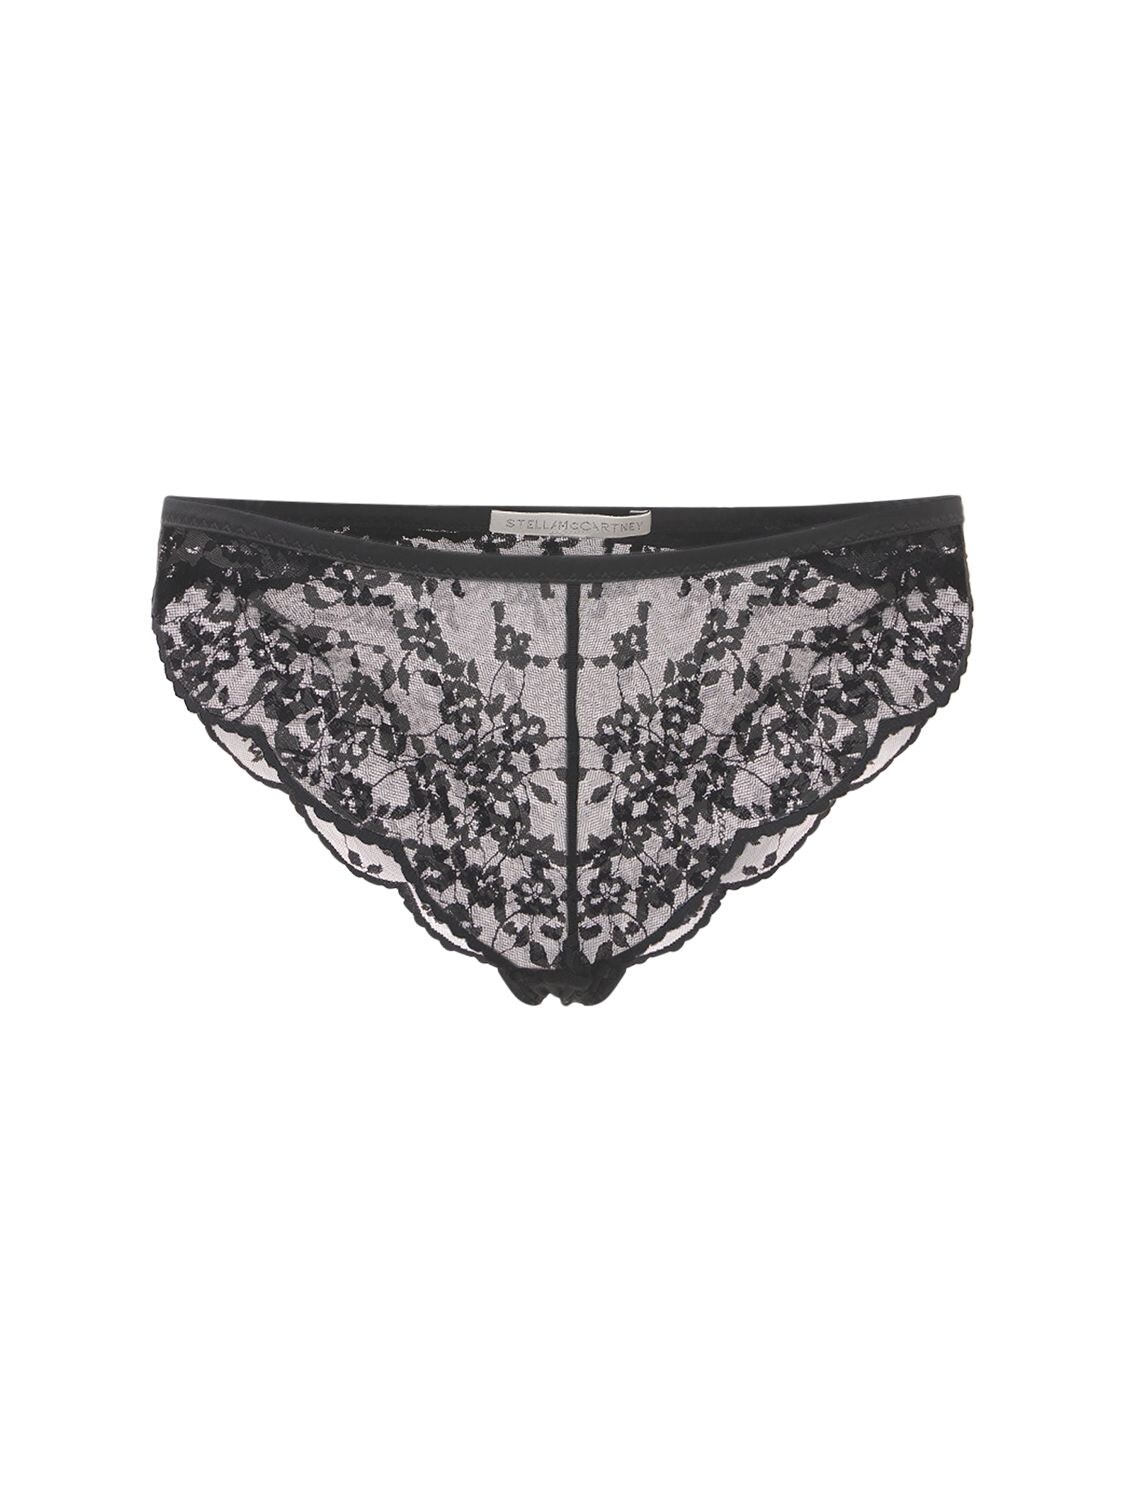 Stella Mccartney Clementine Glancing Low Rise Lace Briefs In Black